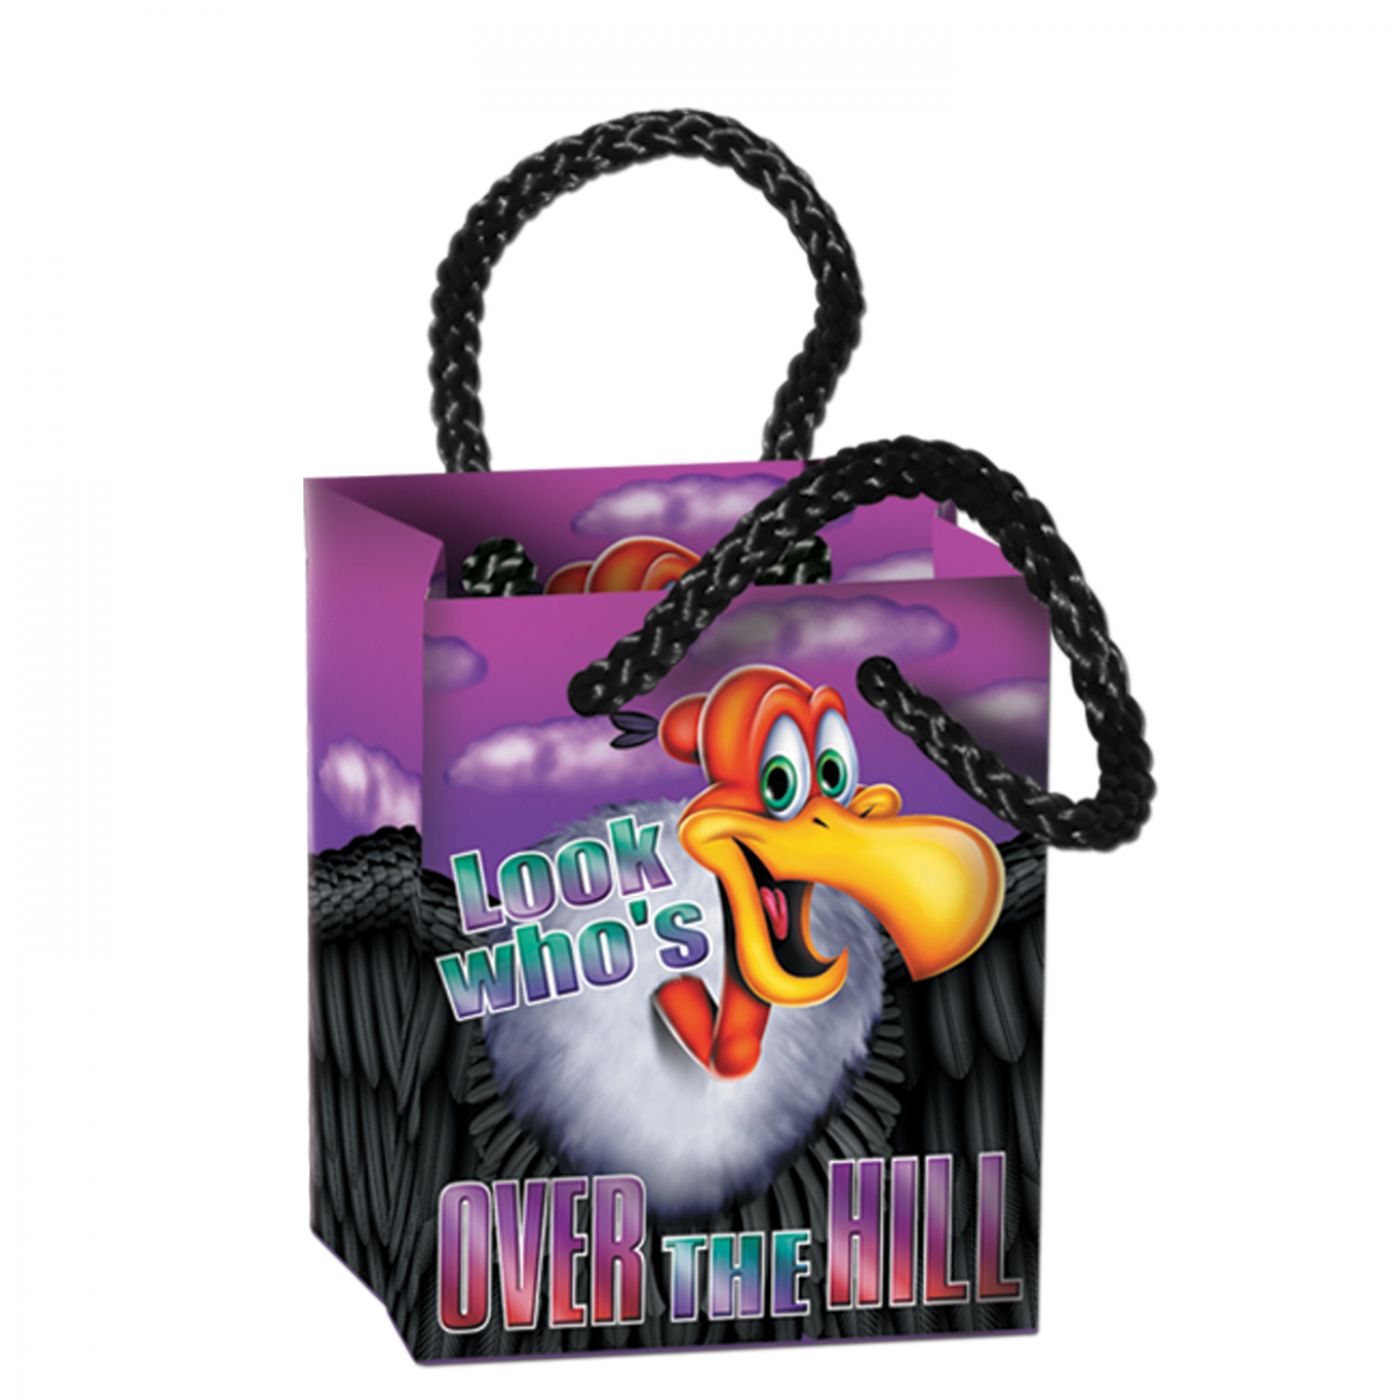 Over The Hill Mini Gift Bag Party Favors image